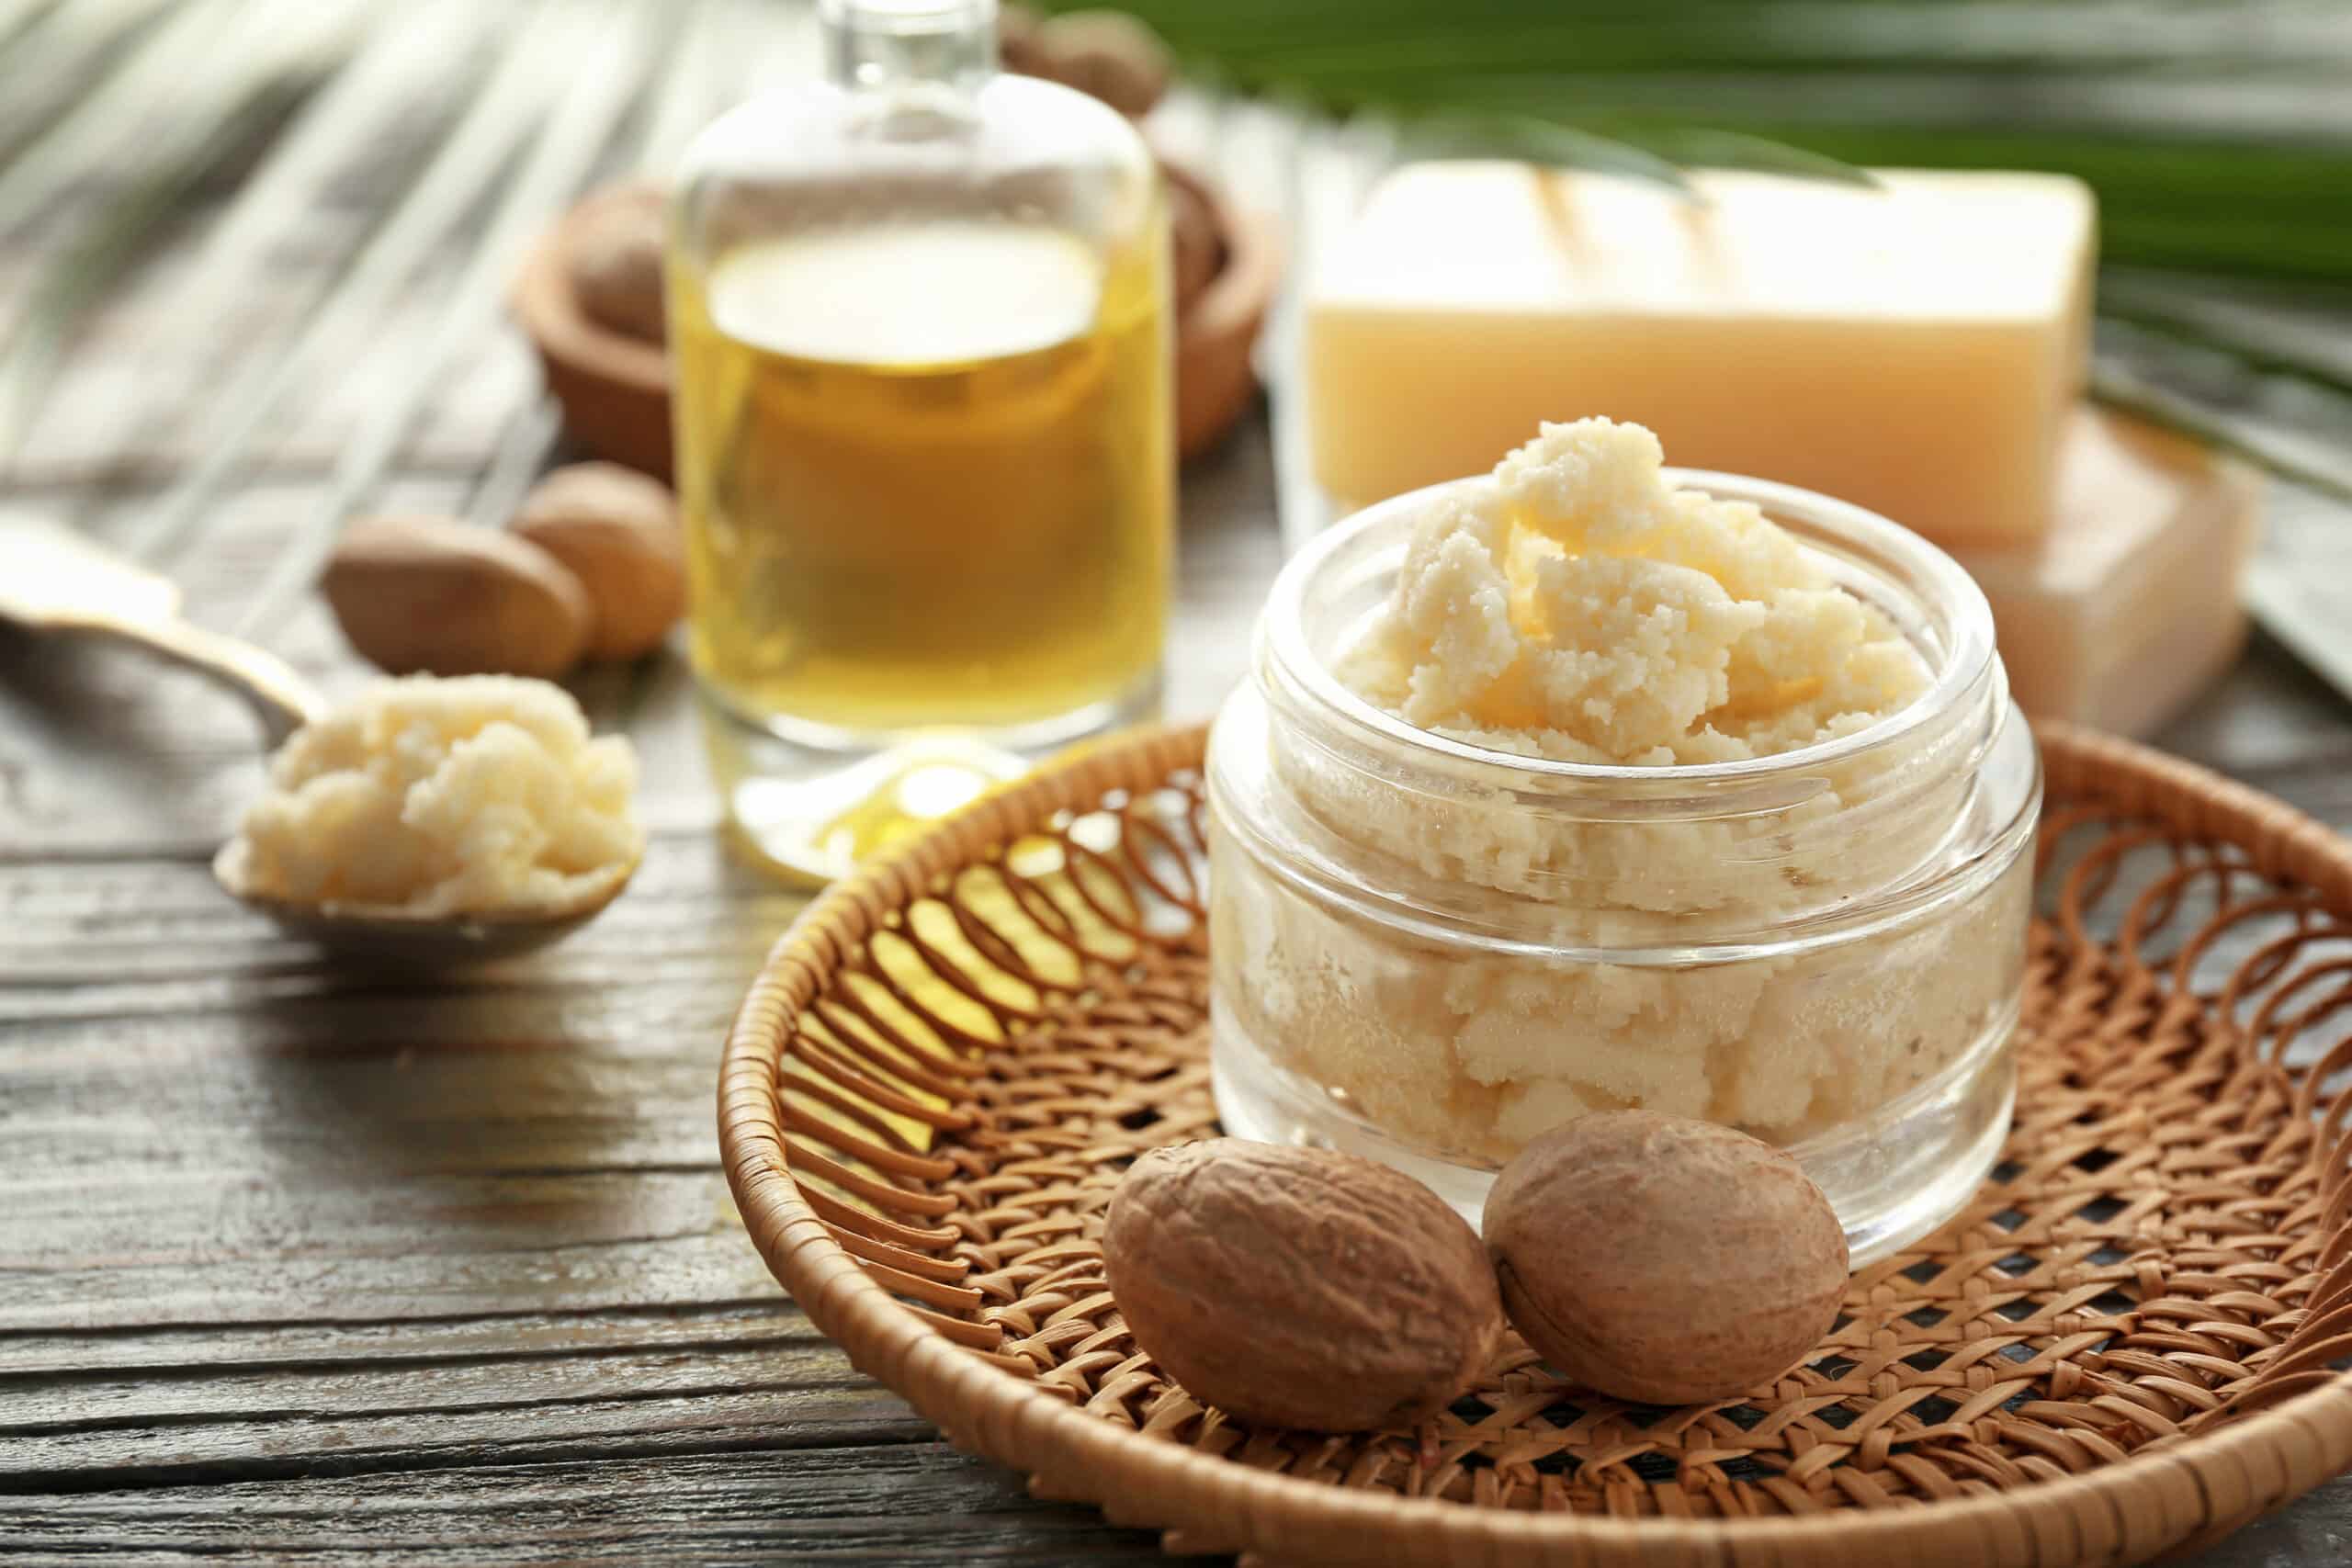 Image of a jar of shea butter with a spoon ready to scoop out shea butter for skin moisturizing.